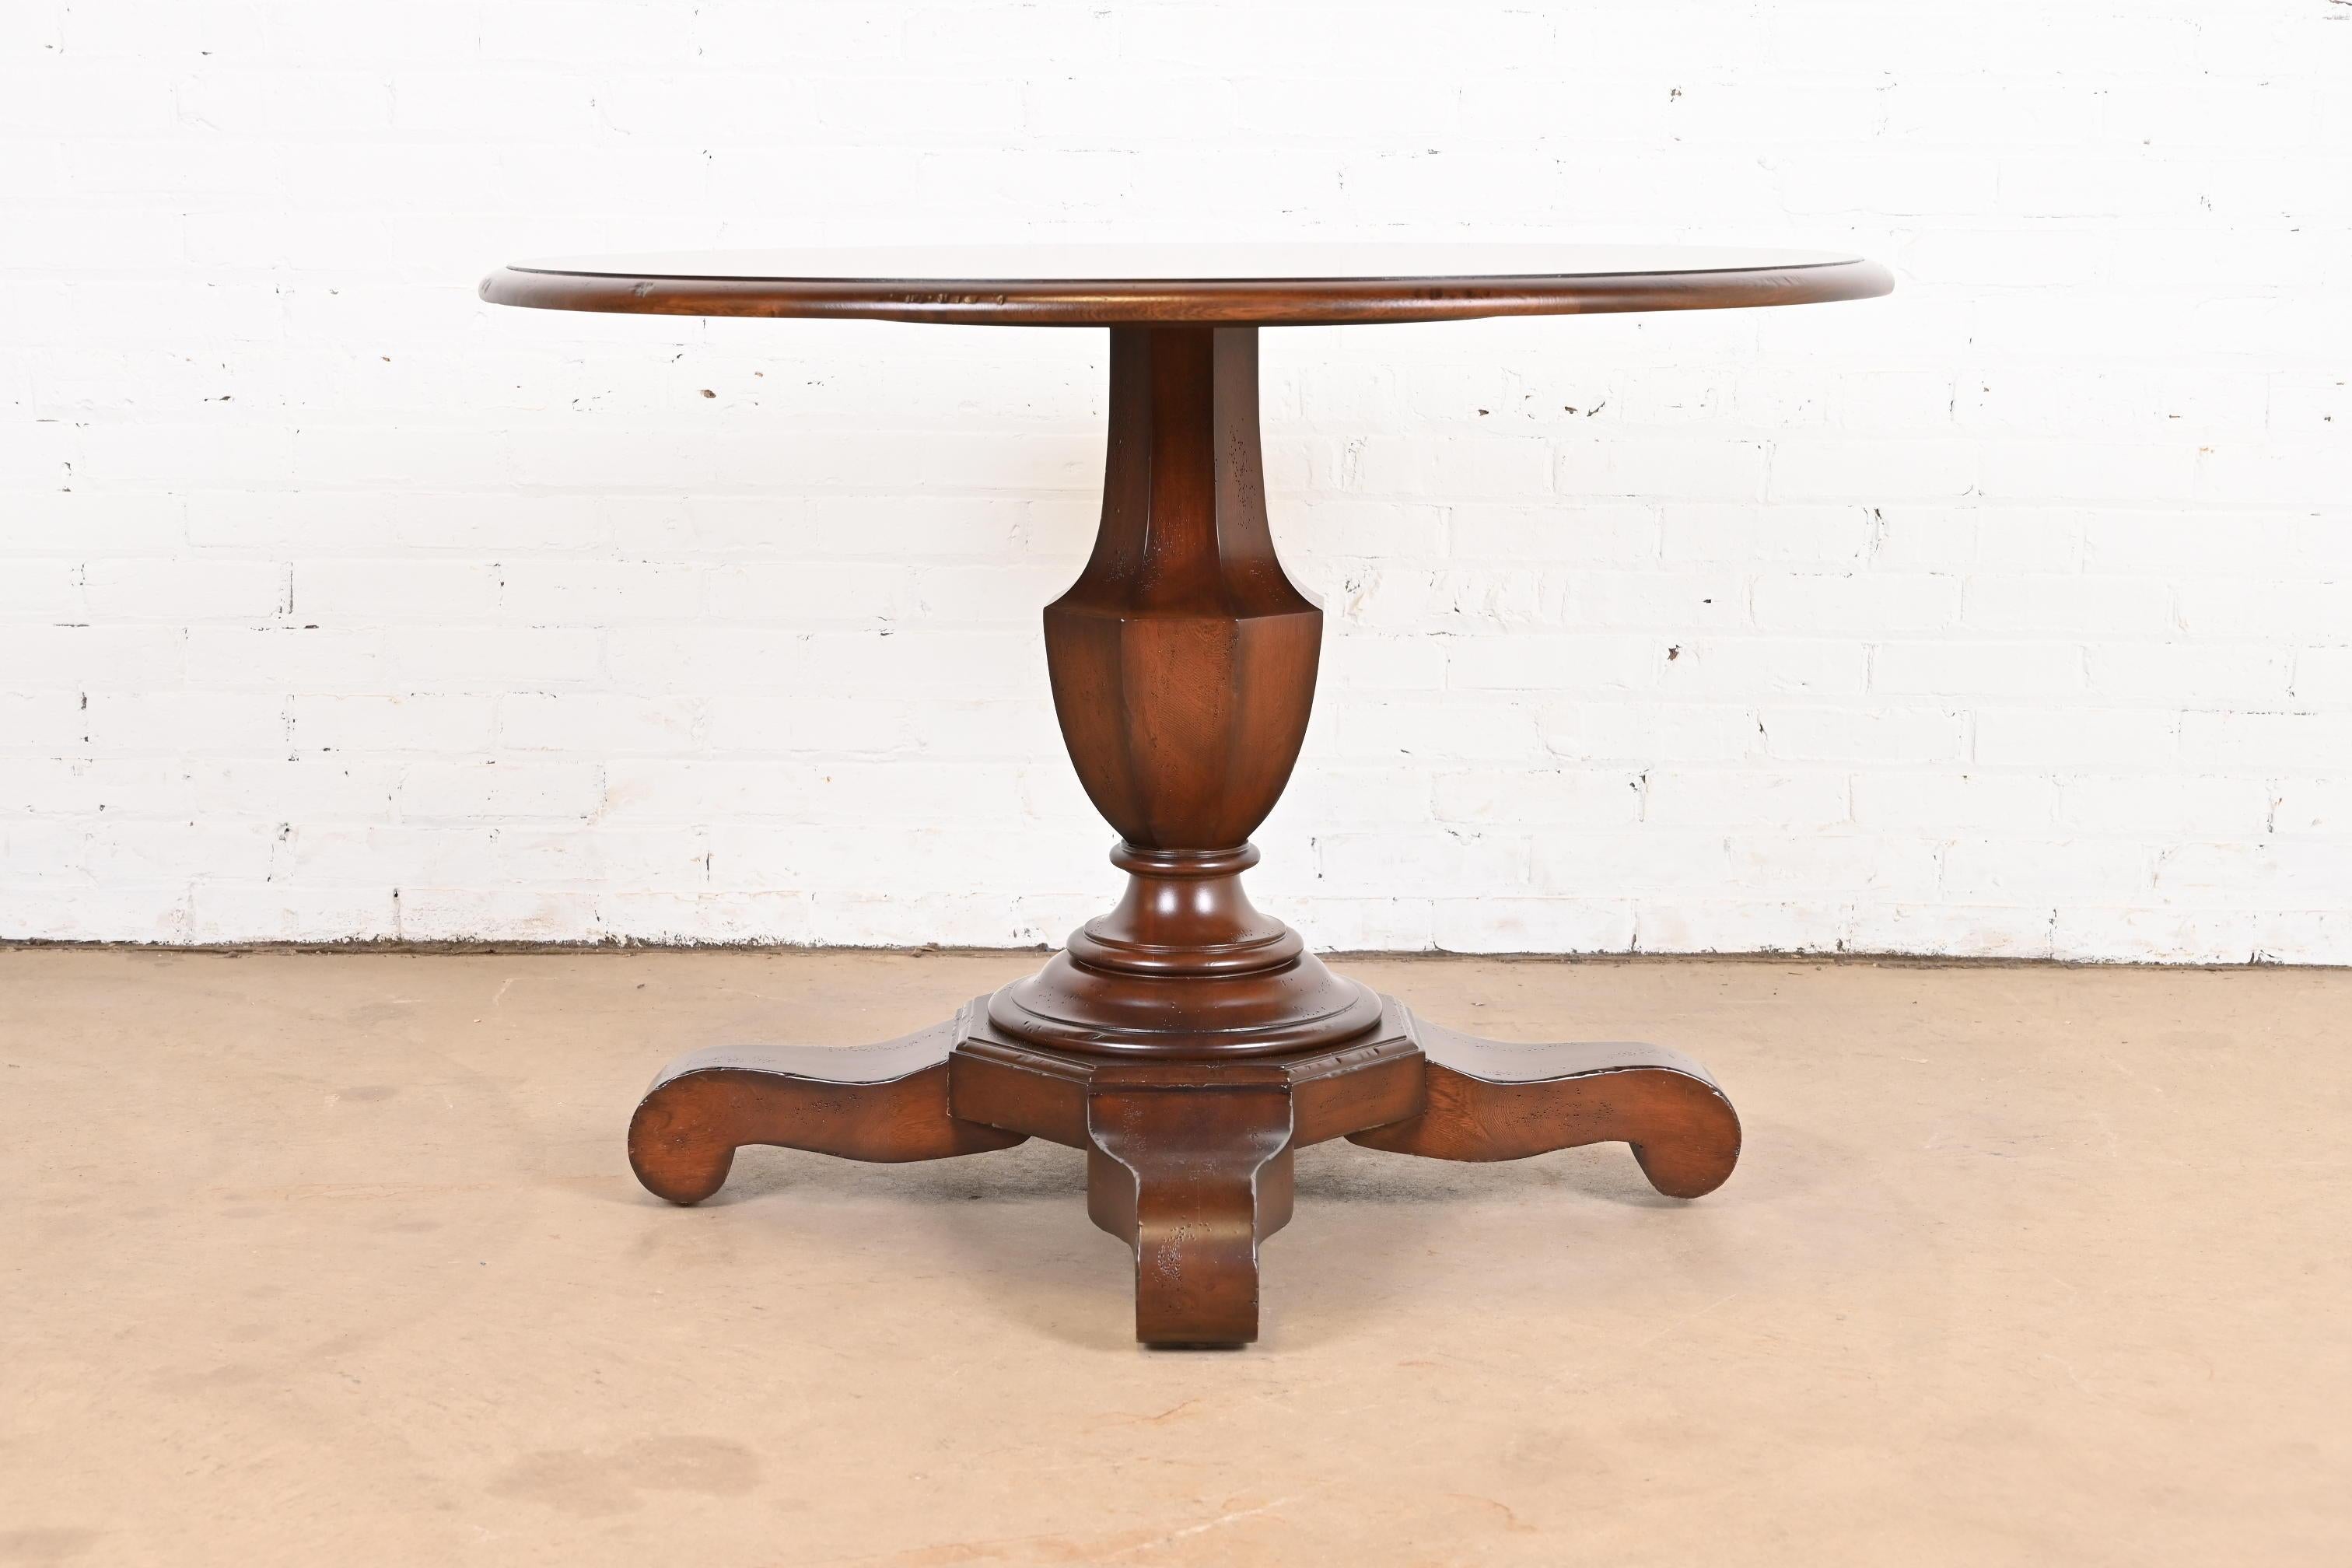 Baker Furniture Empire Carved Mahogany Pedestal Breakfast Table or Center Table 5